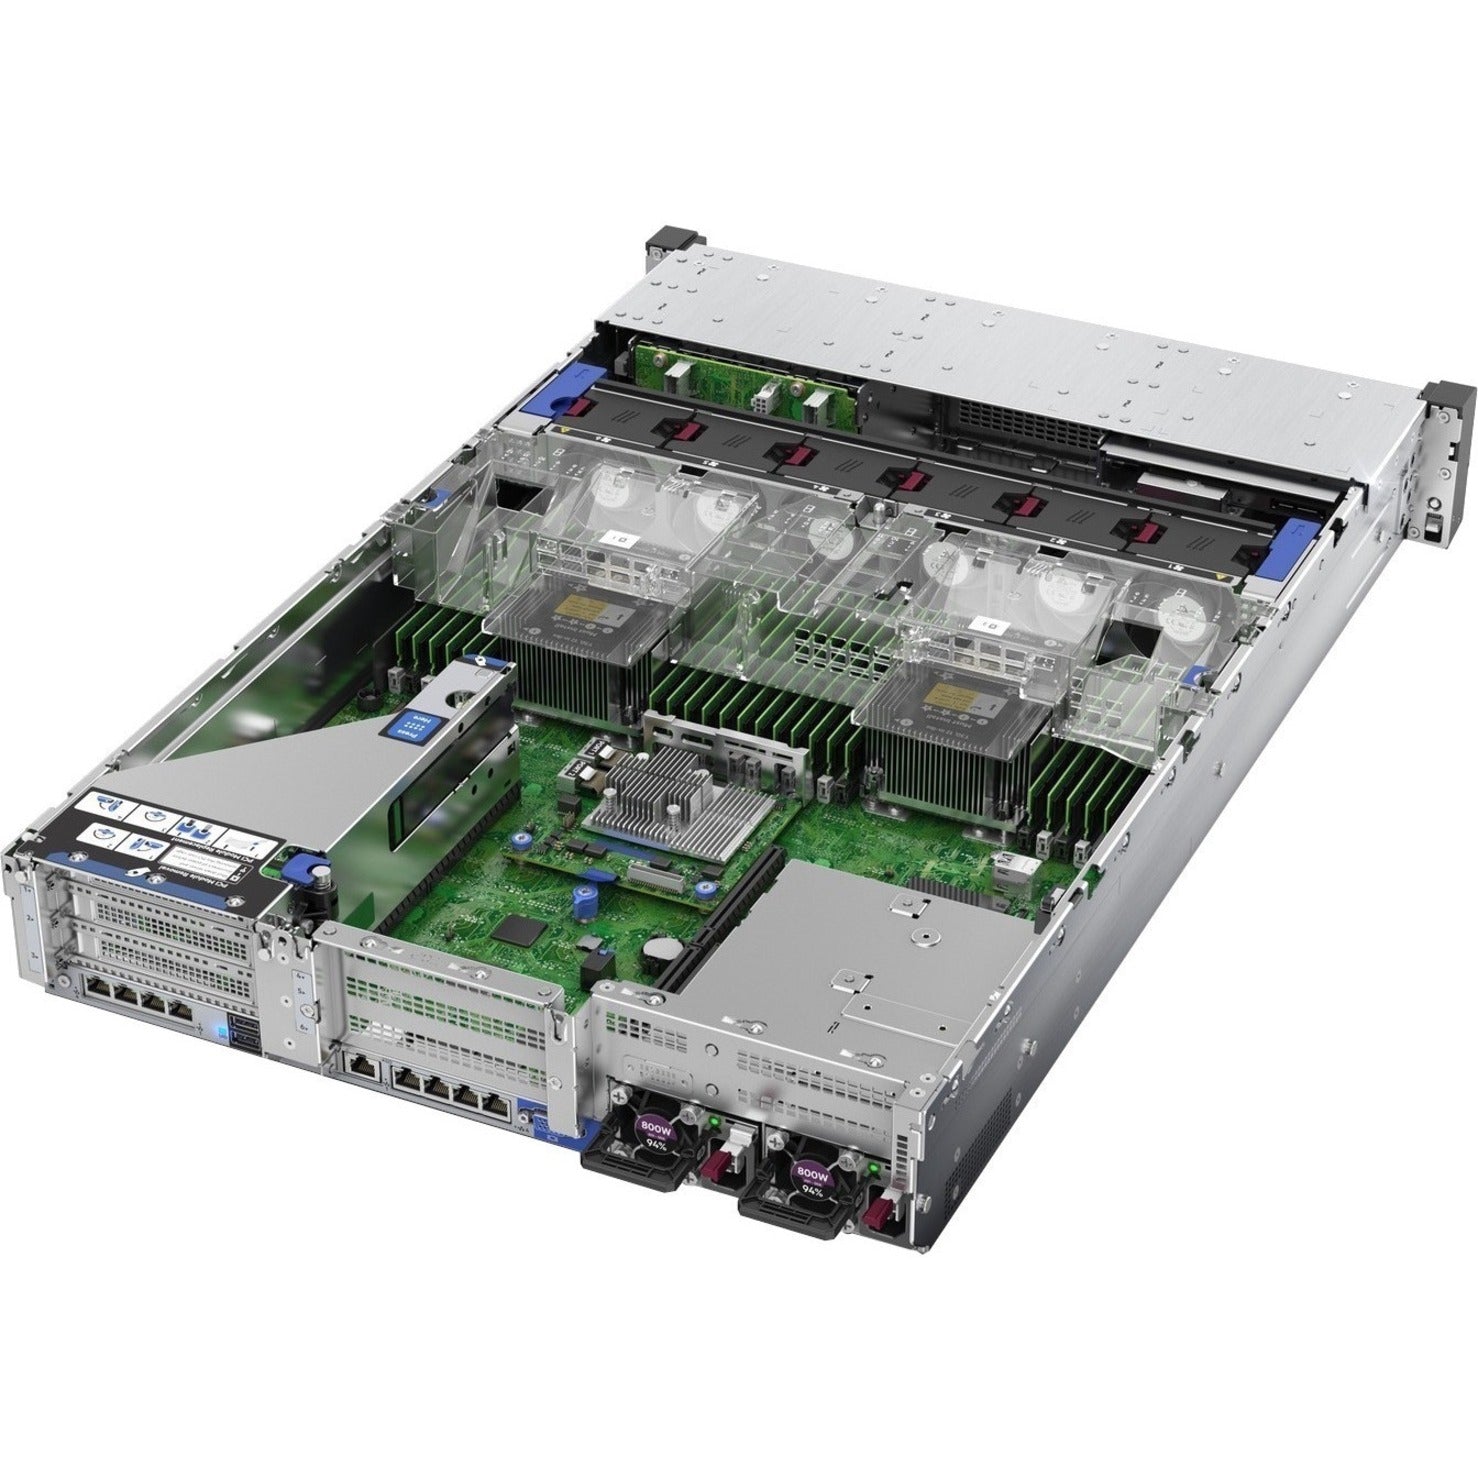 HPE ProLiant DL380 G10 Server - Hexadeca-core, 32GB RAM, 2.90GHz, 8SFF [Discontinued]